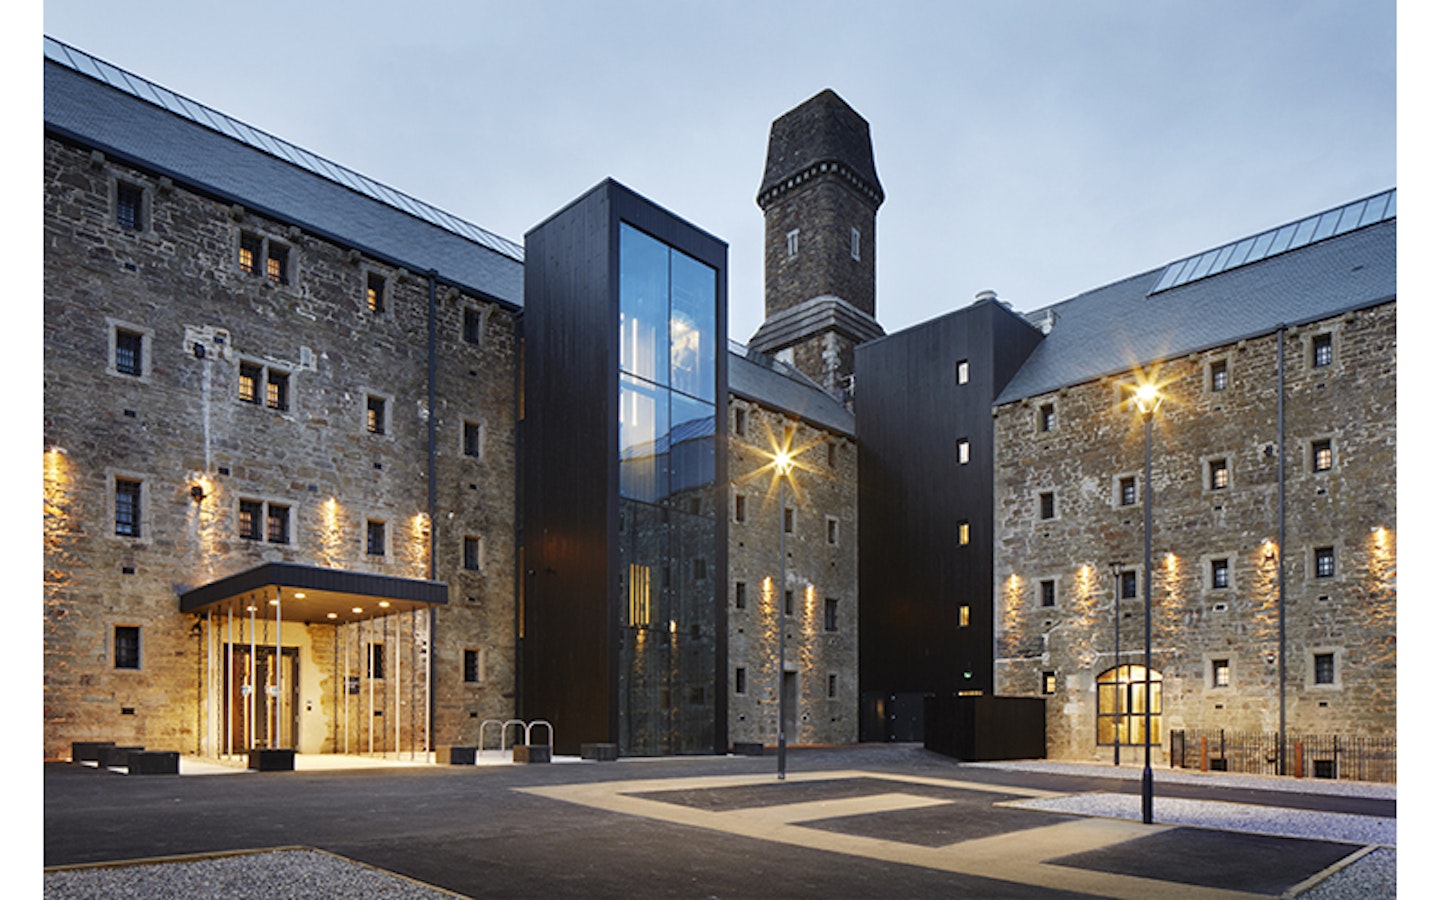 Sleep in a converted prison 